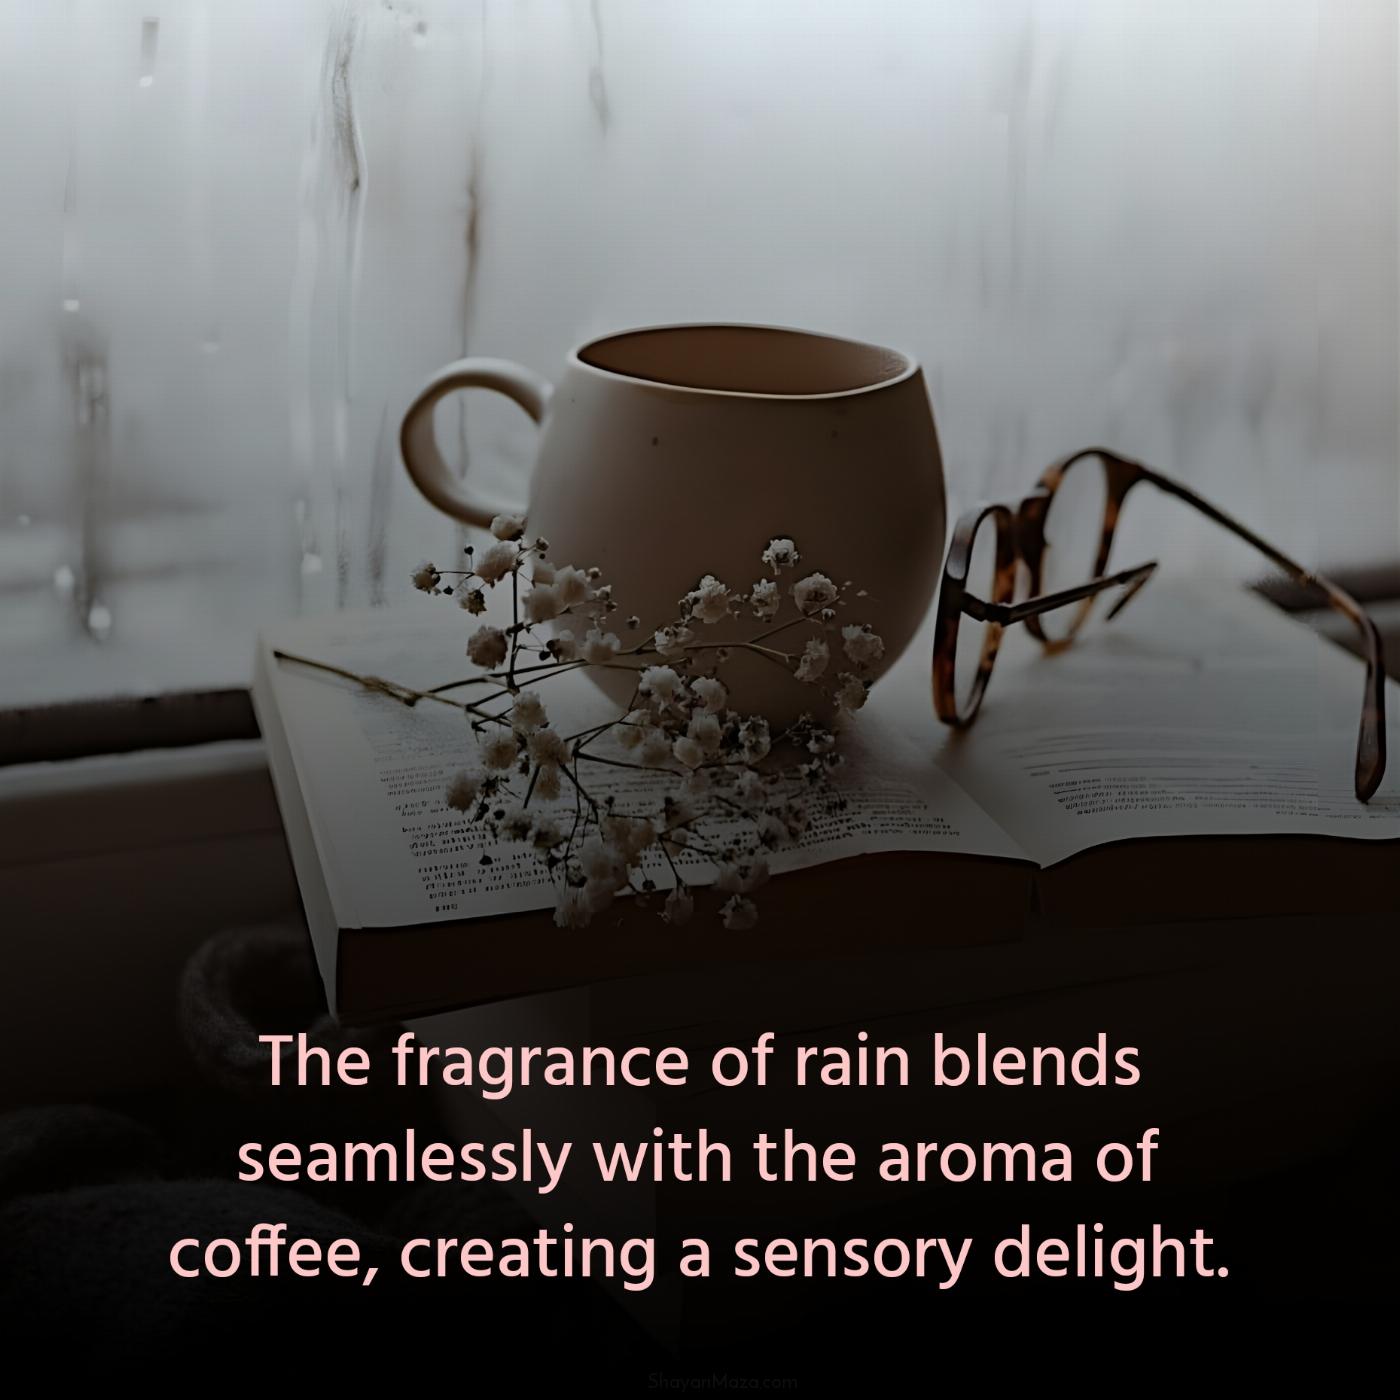 The fragrance of rain blends seamlessly with the aroma of coffee